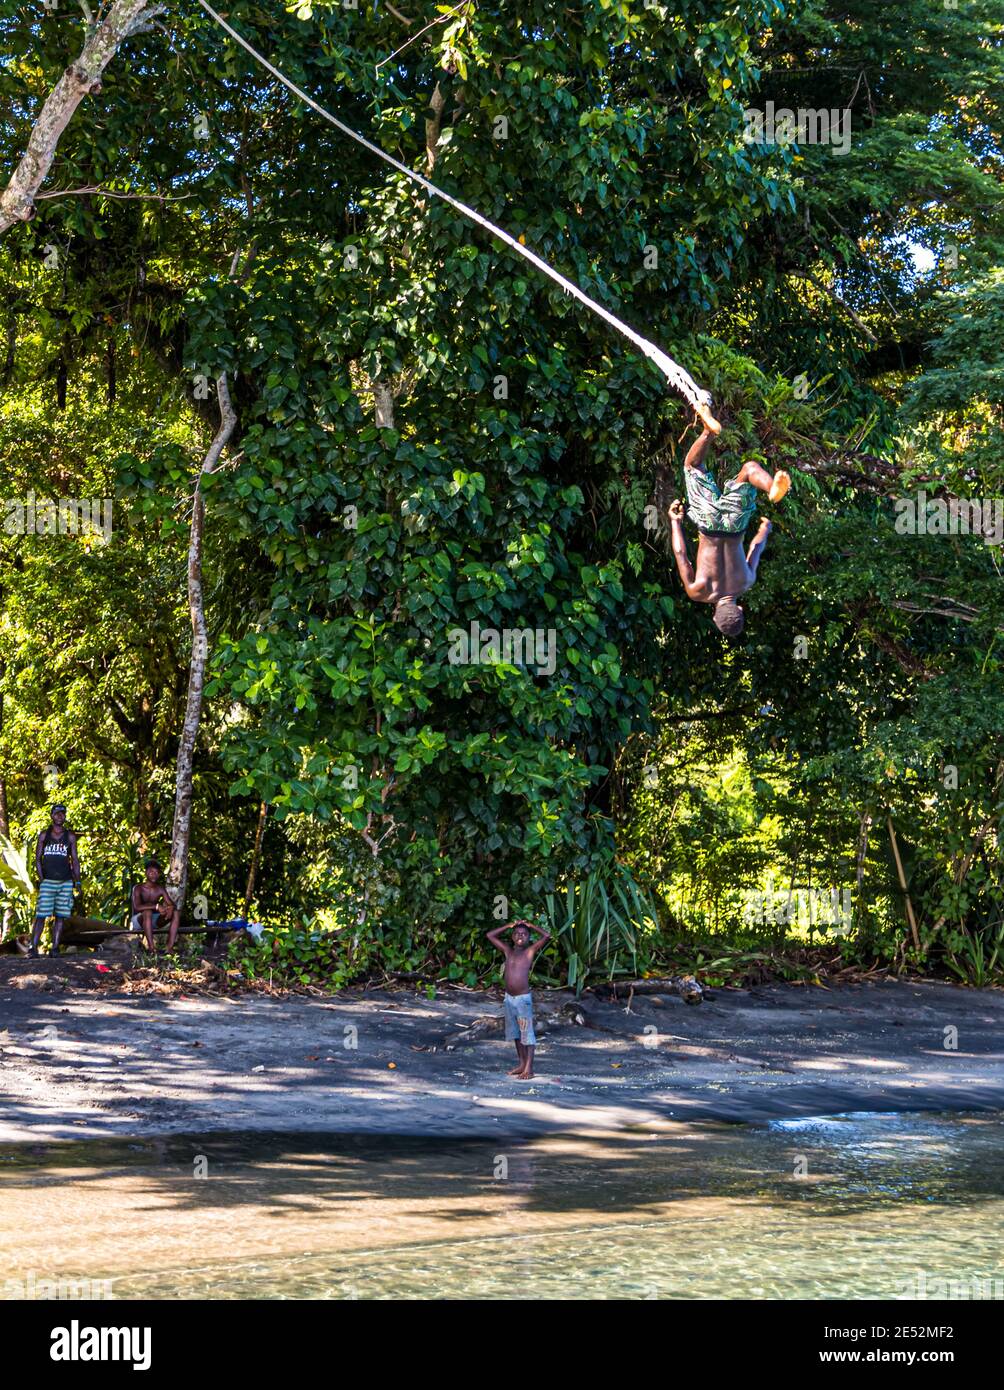 Tarzan exercise with jumping into shallow water on the beach in Bougainville, Papua New Guinea Stock Photo